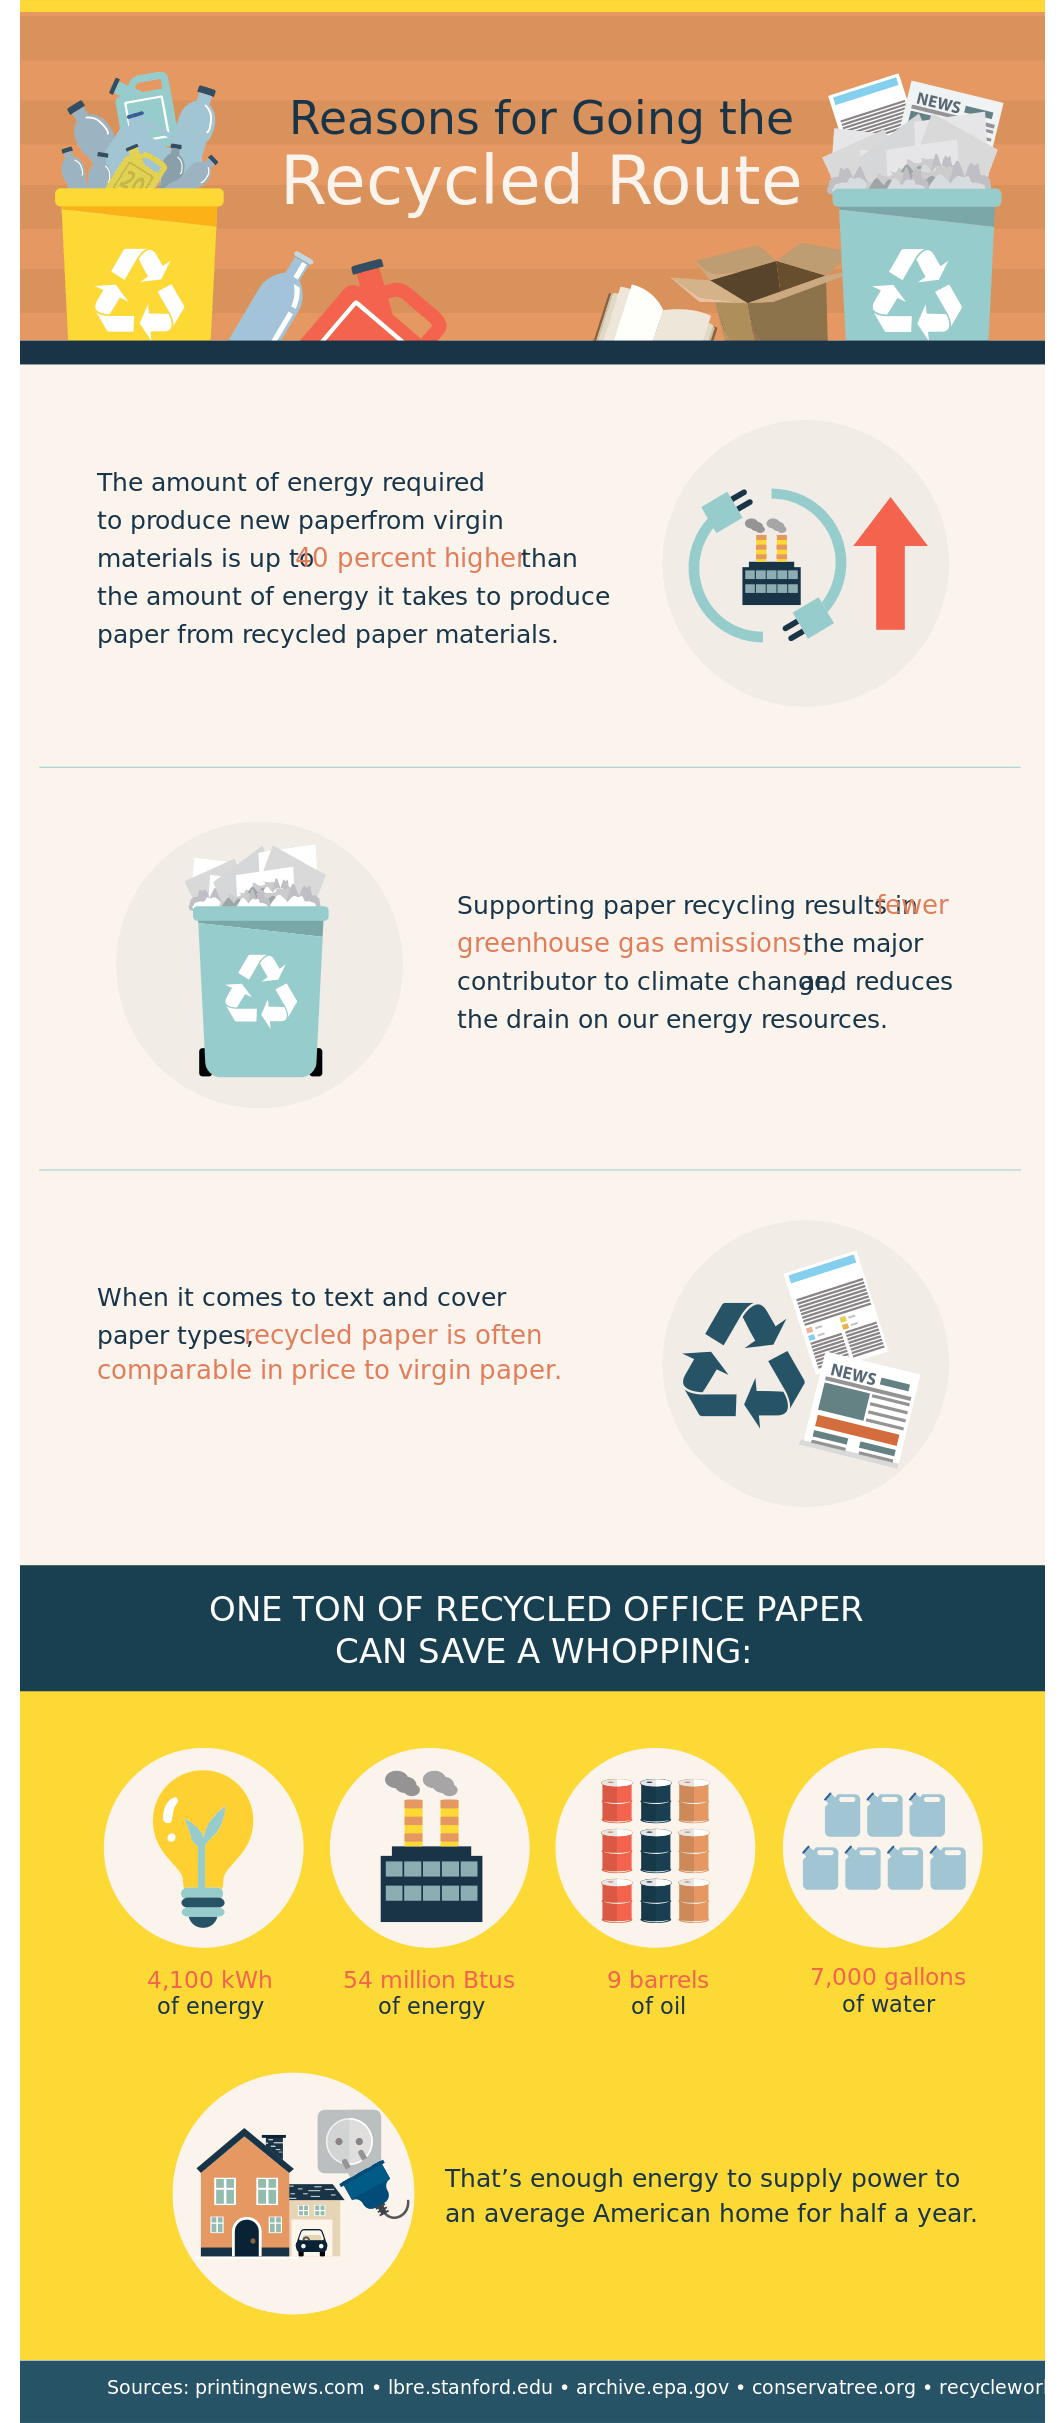 Reasons to consider recycling paper